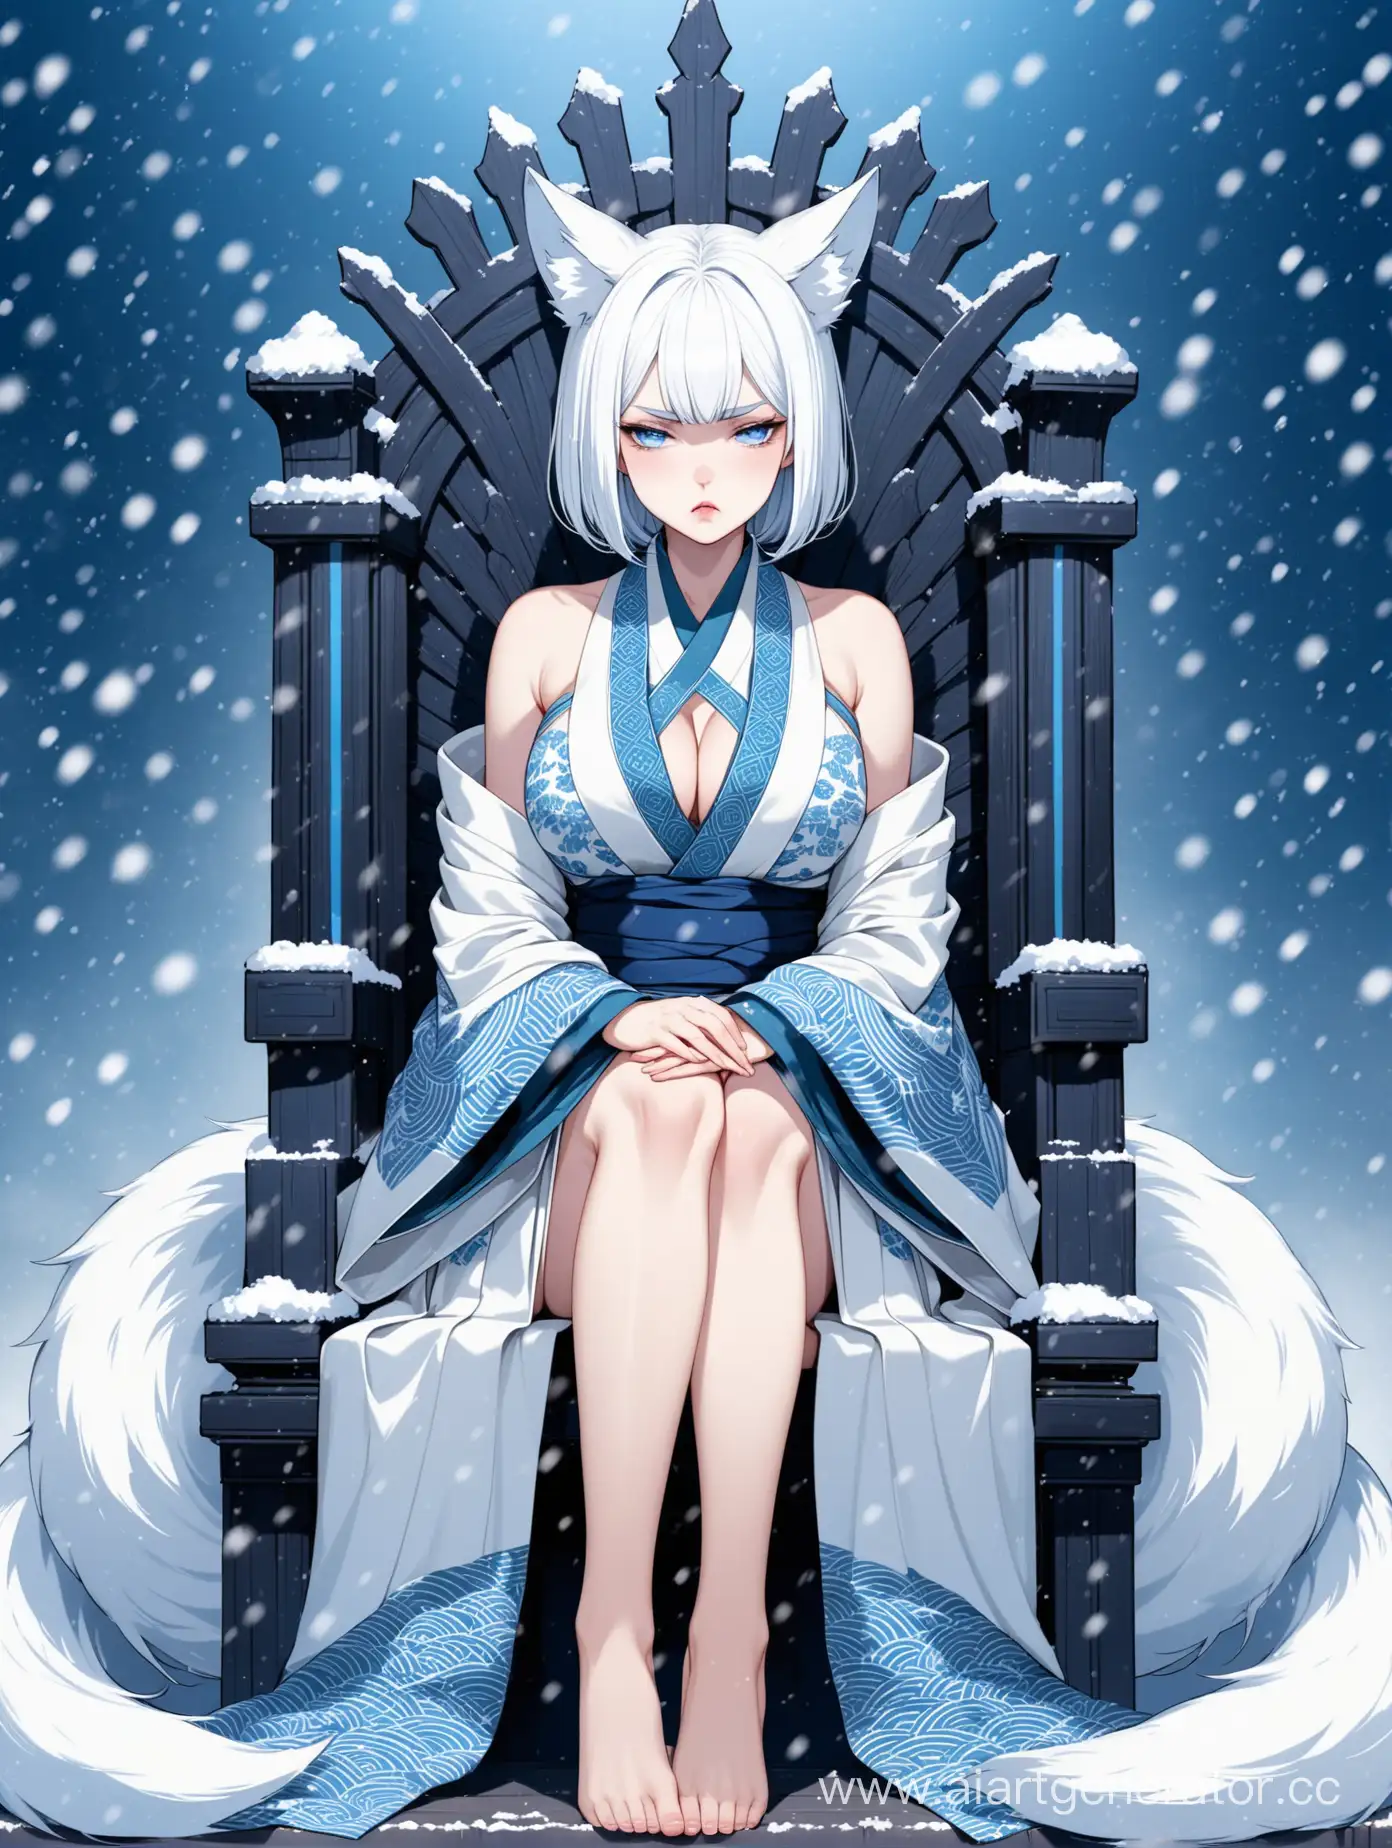 Ethereal-Snow-Queen-in-White-Kimono-on-Winter-Throne